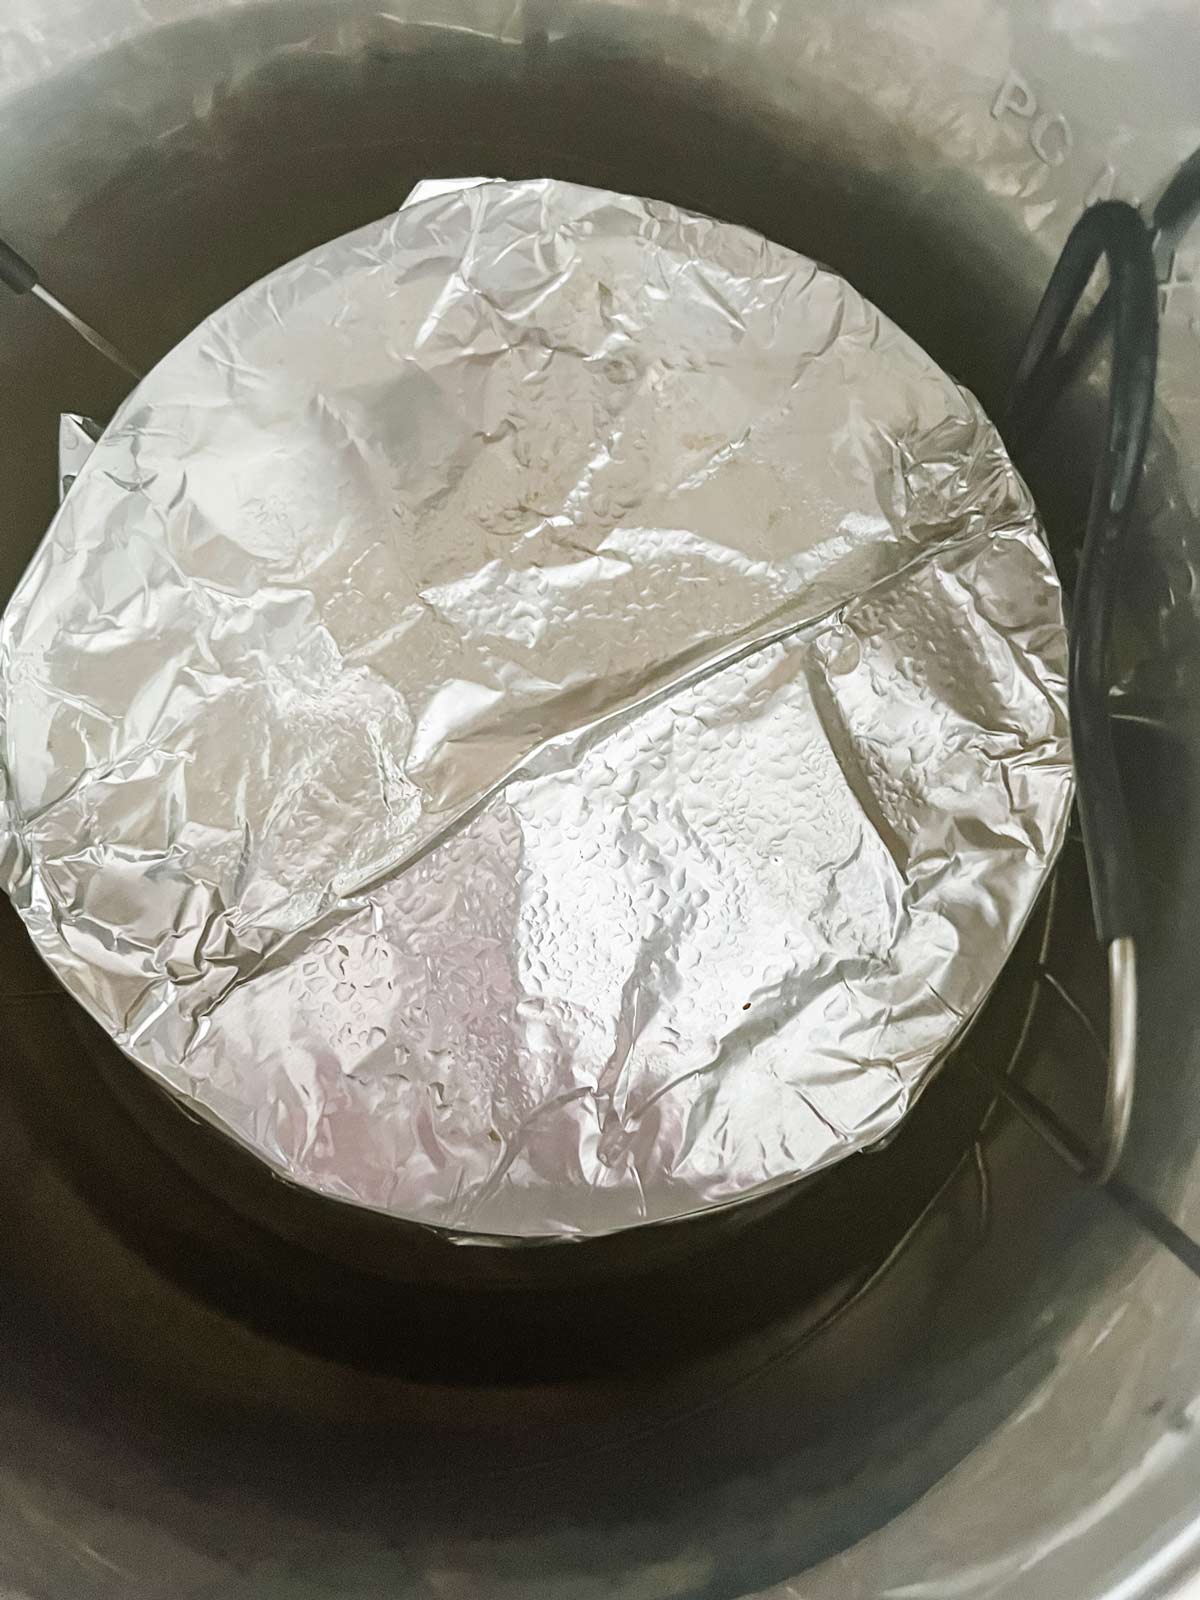 Foil covered egg bites that have just been cooked in an Instant Pot.